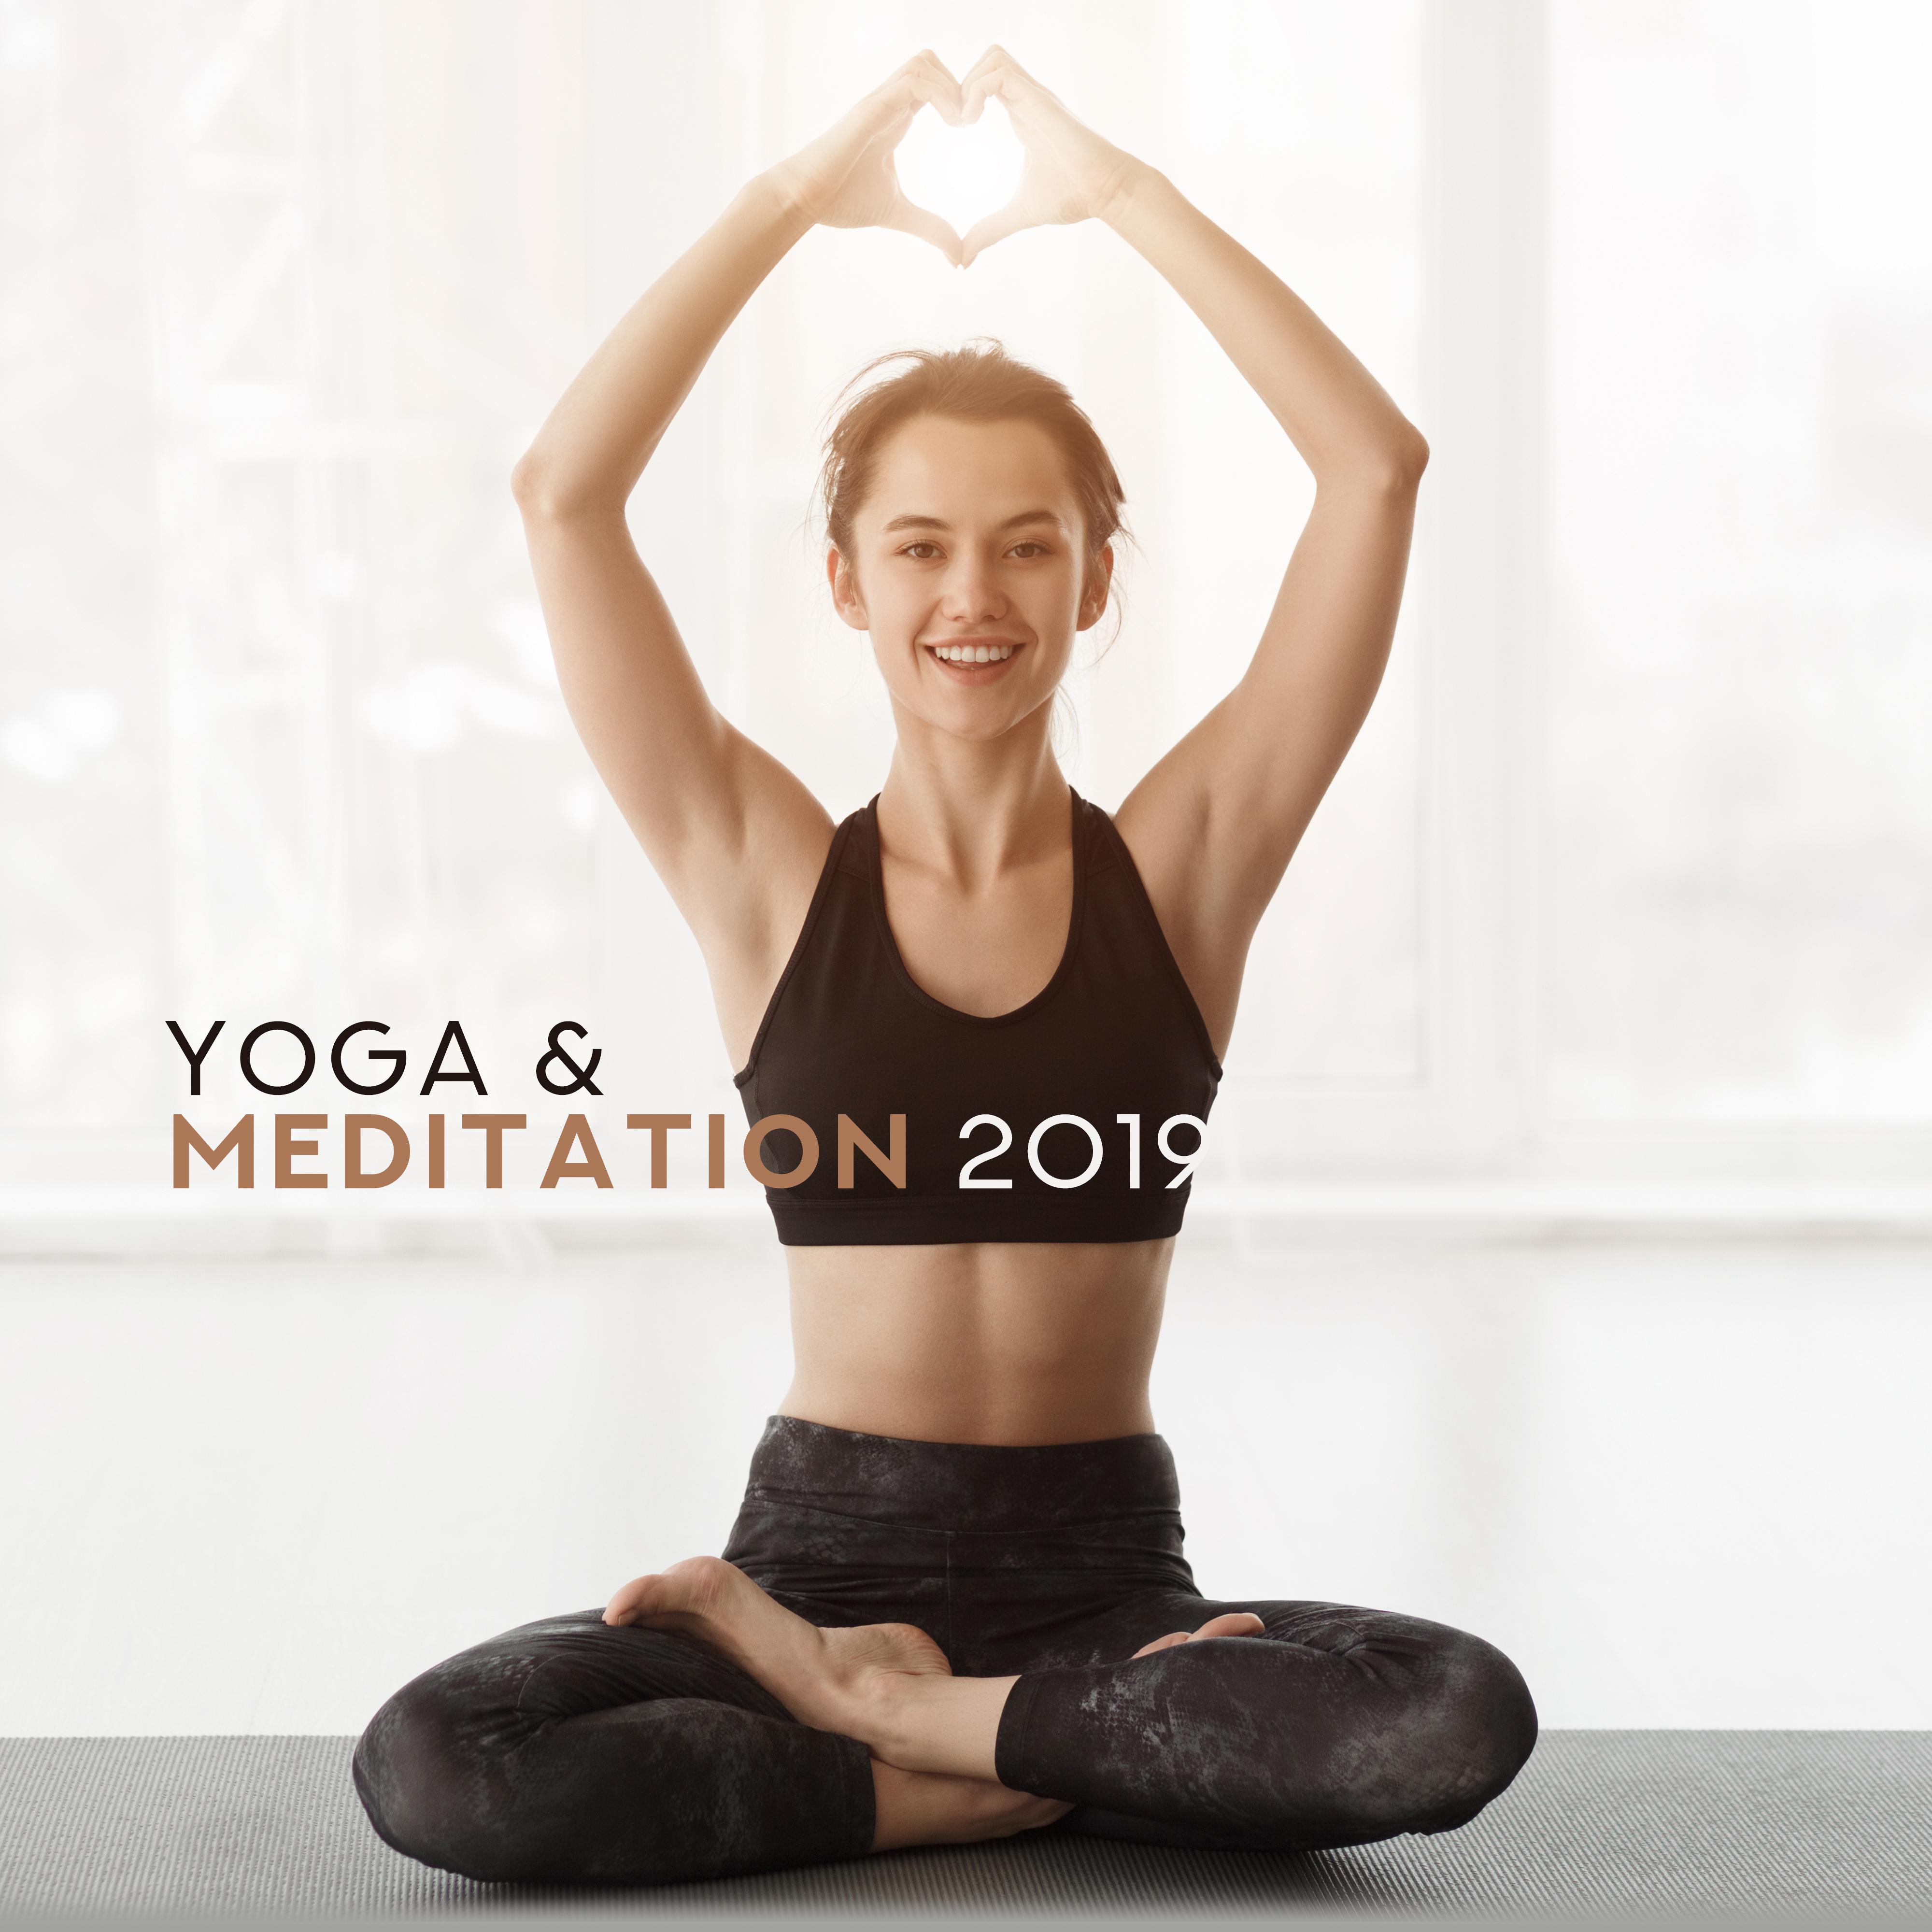 Yoga & Meditation 2019 - Ambient Meditation Vibes, Pure Ambiance, Calming Meditation Mix for Relaxation, Inner Balance, Zen, Lounge